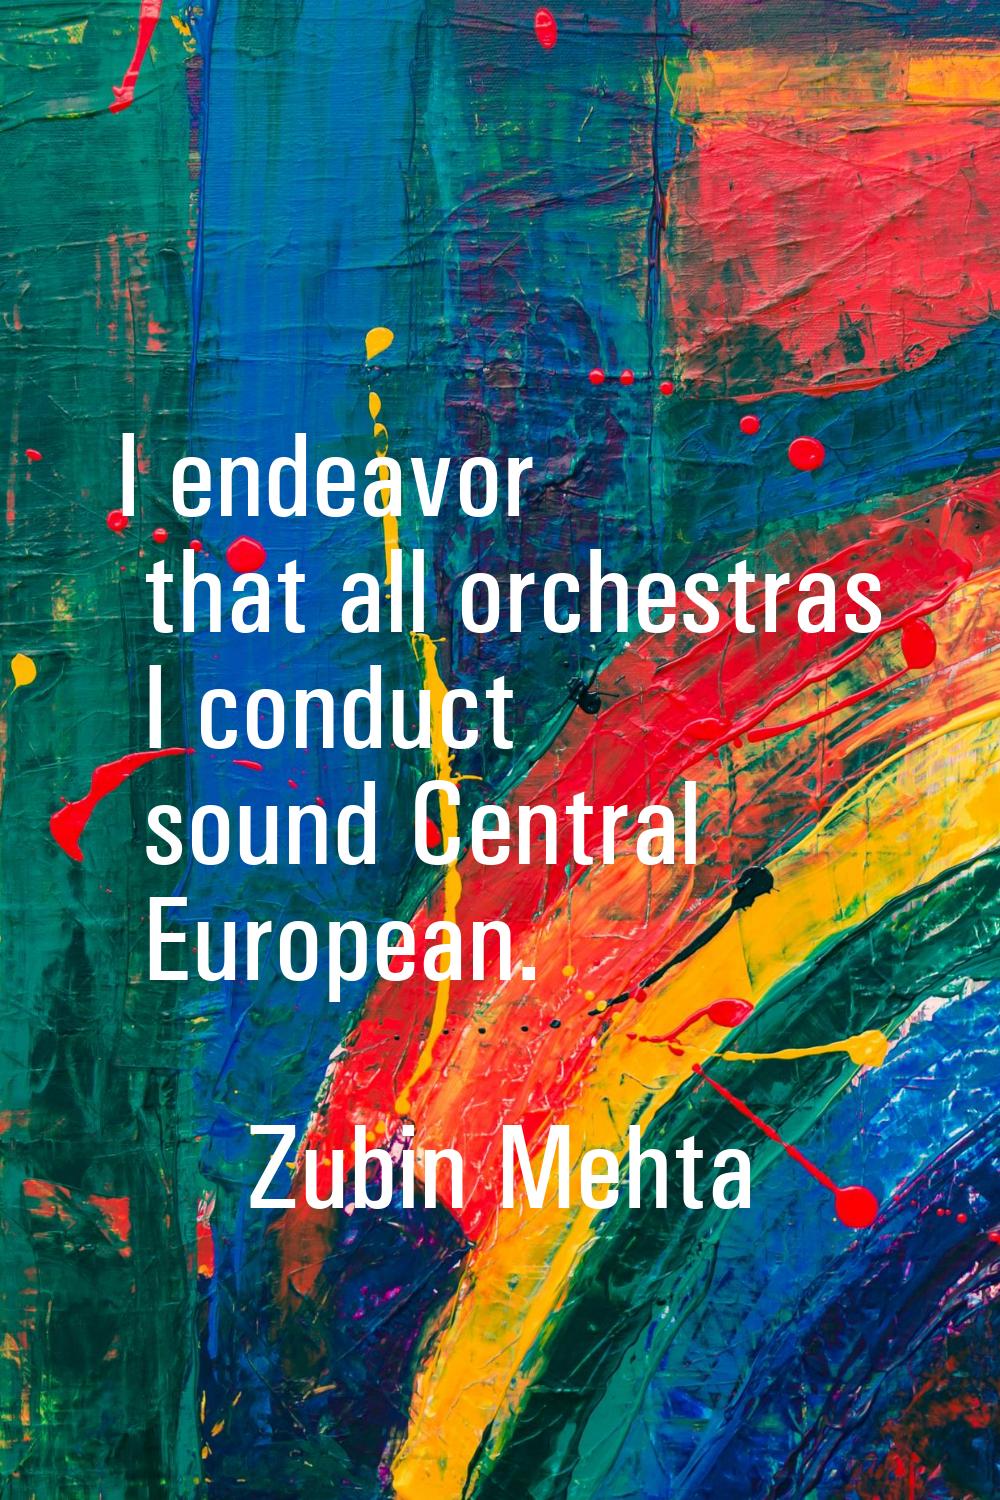 I endeavor that all orchestras I conduct sound Central European.